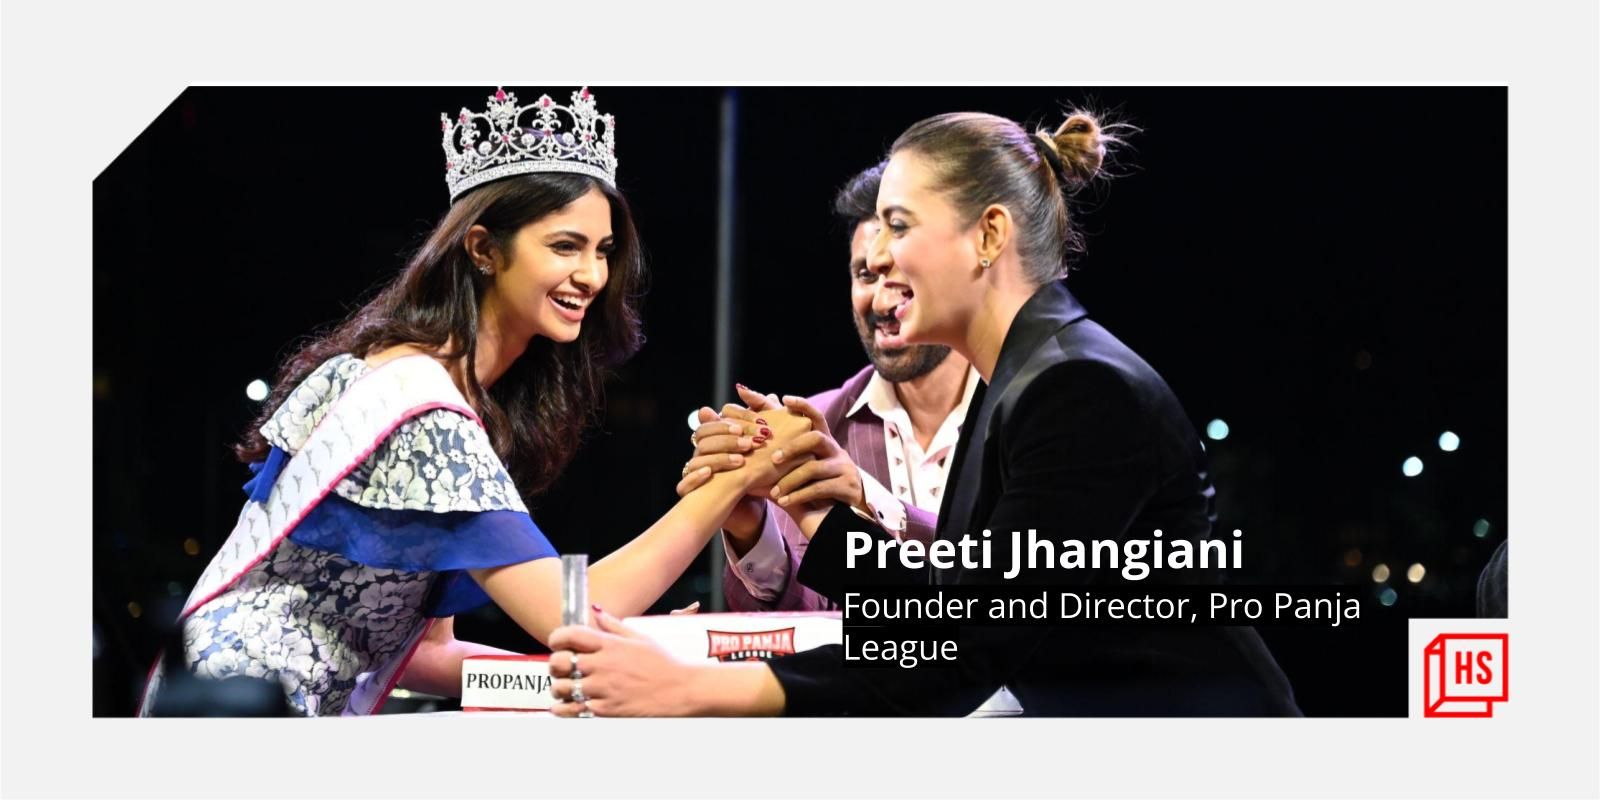 From acting to entrepreneurship, how Preeti Jhangiani launched India’s first professional arm-wrestling league
